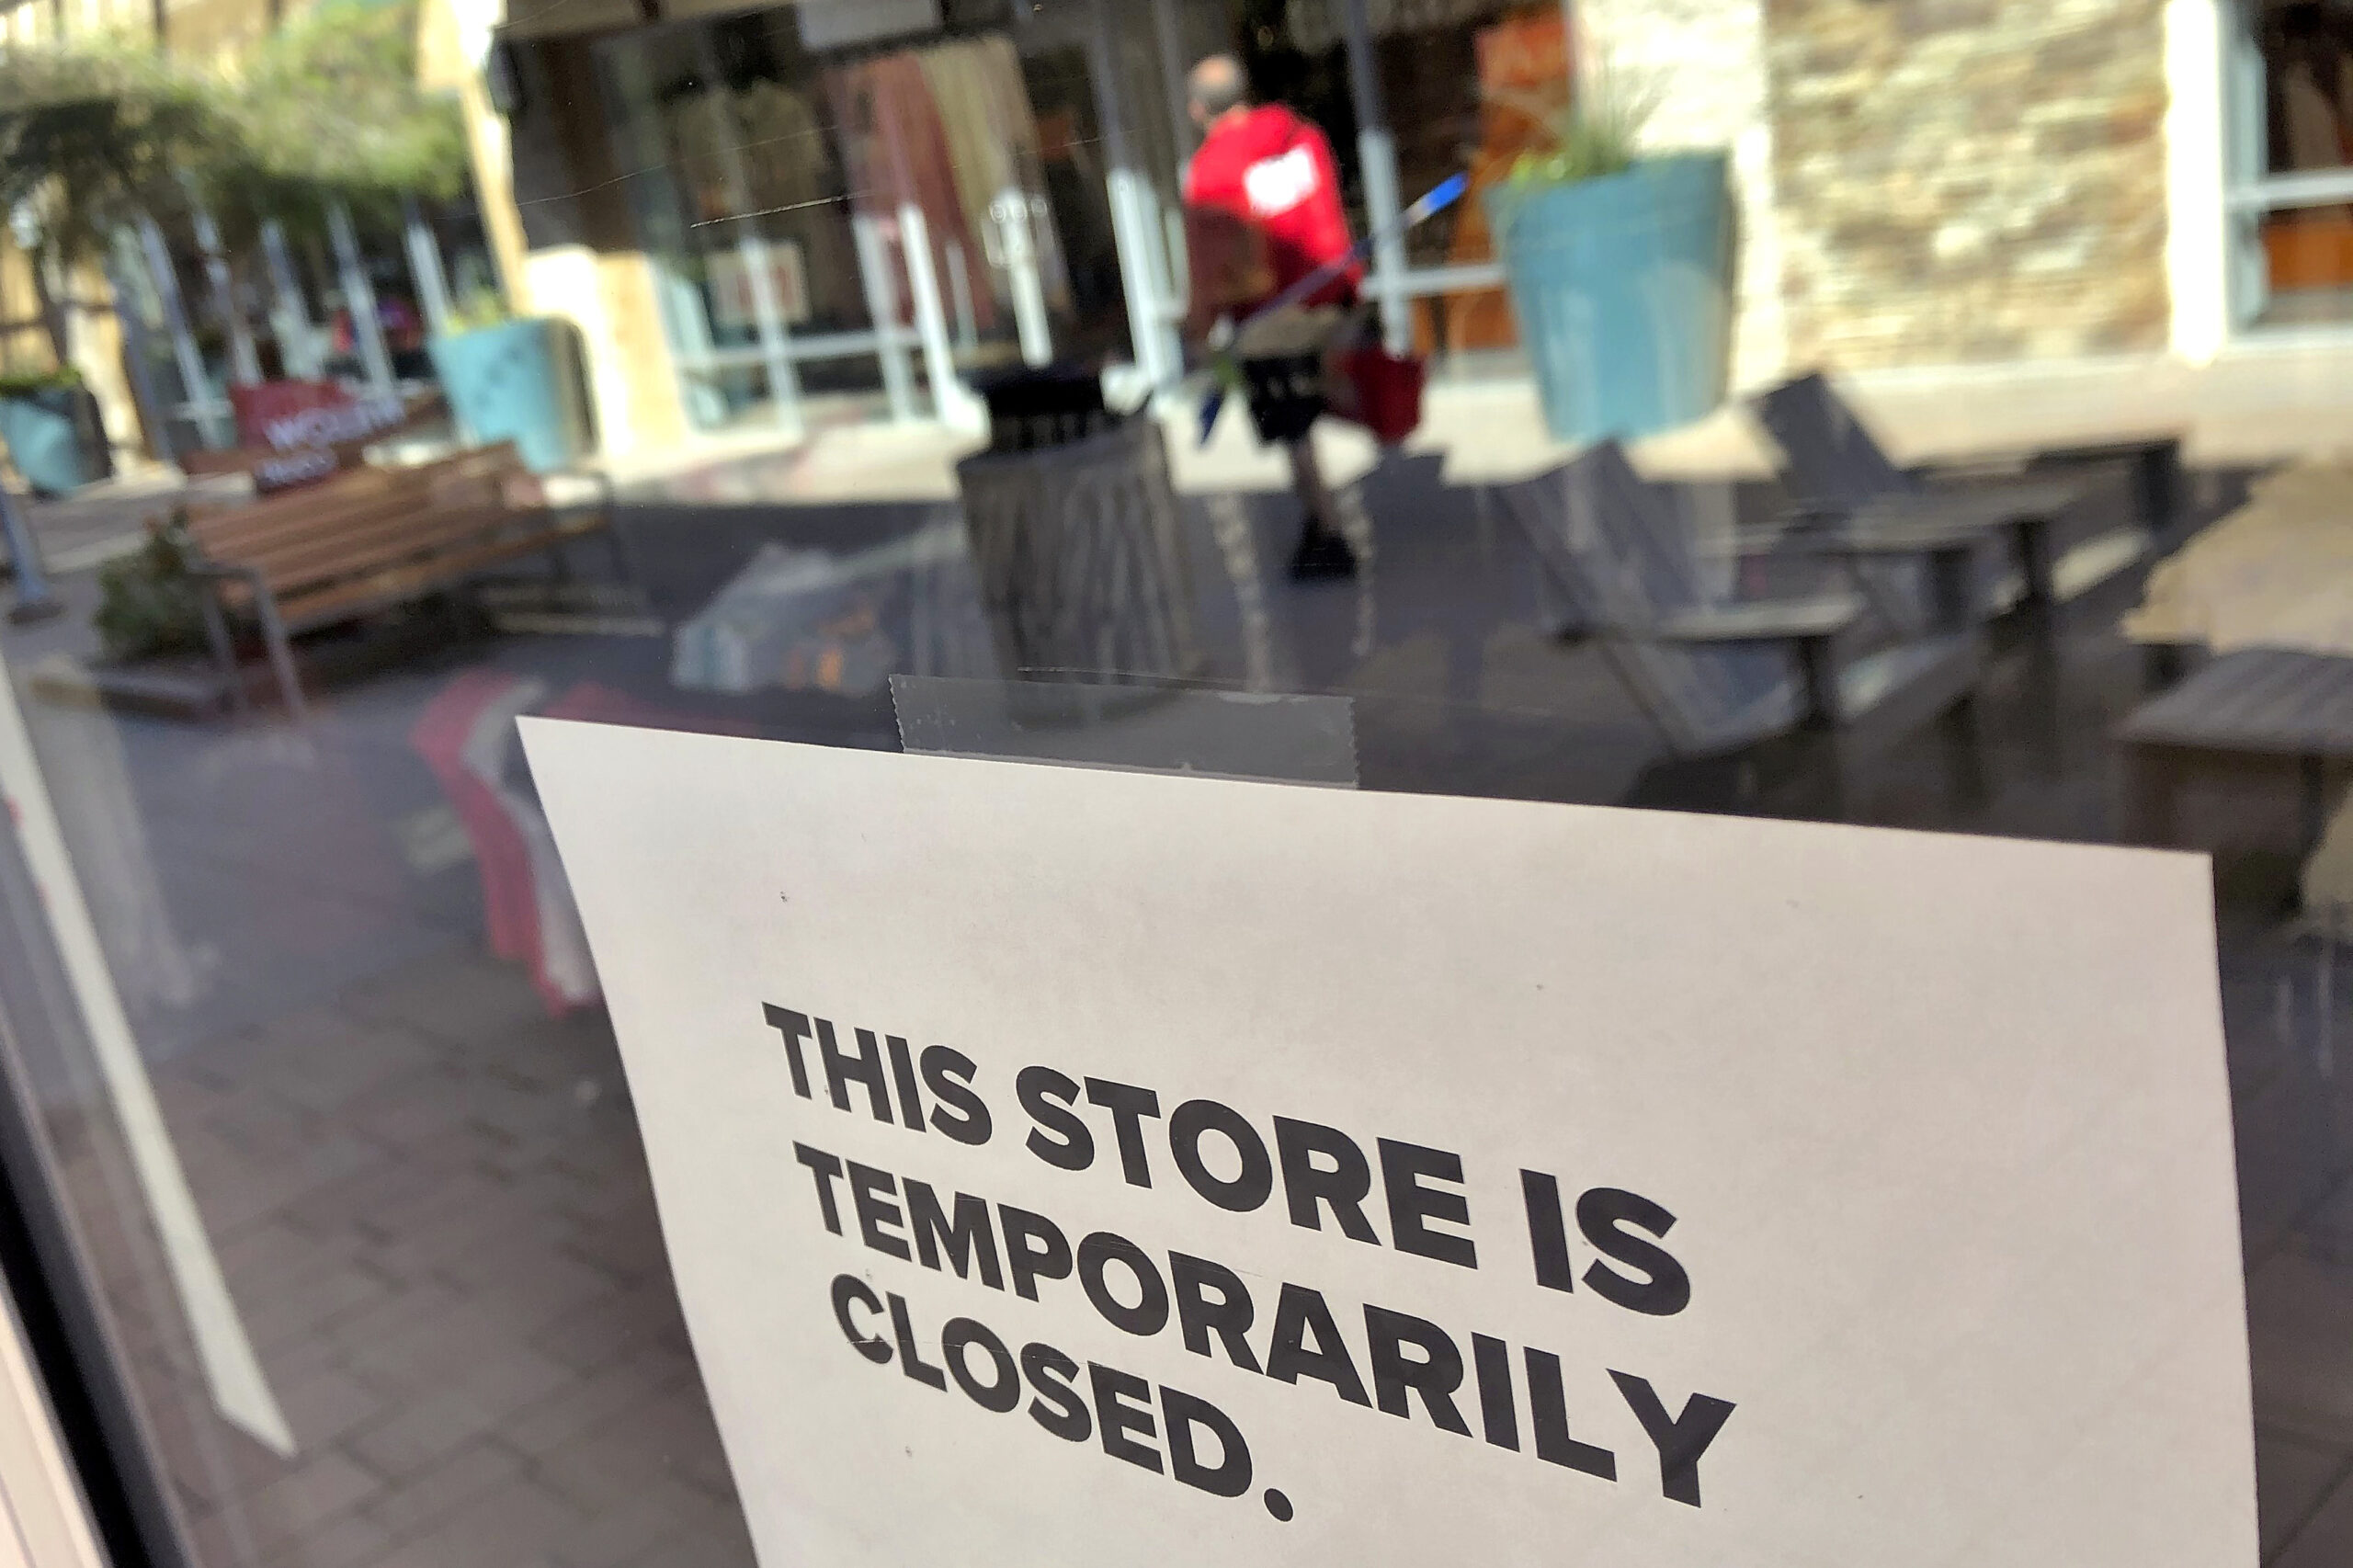 Closed sign on store